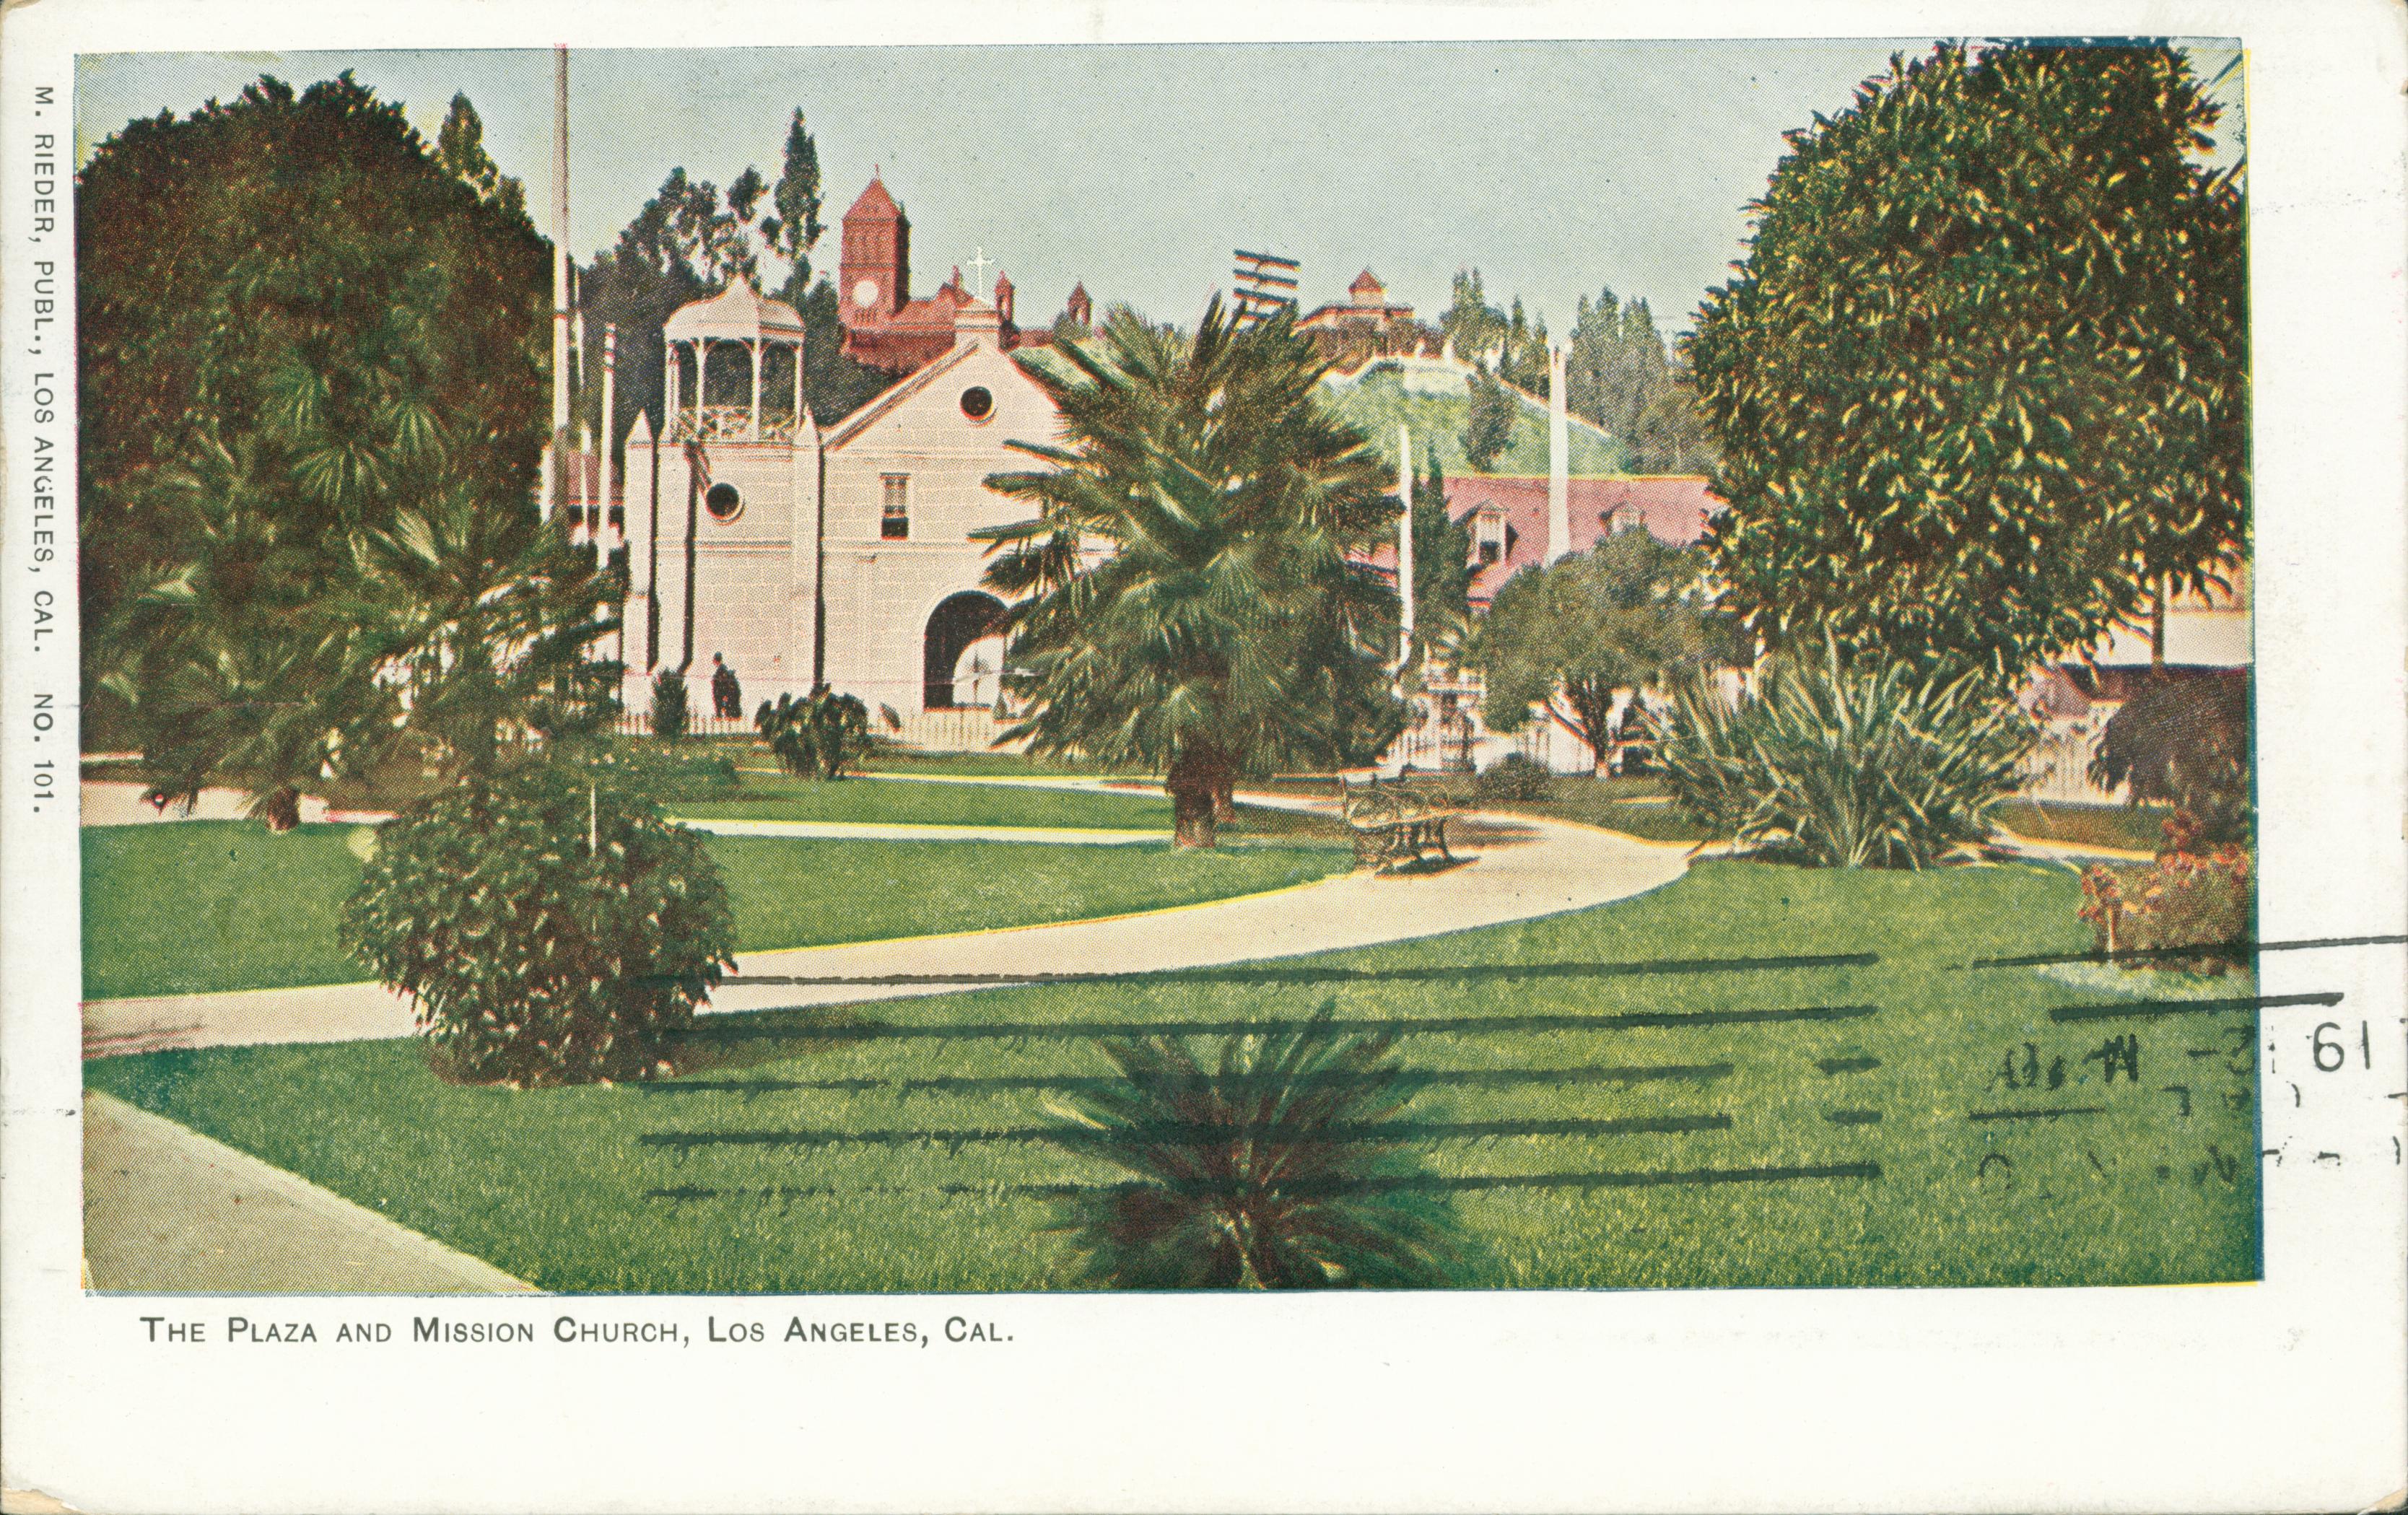 This postcard shows the Plaza Church in Los Angeles, facing a front park.